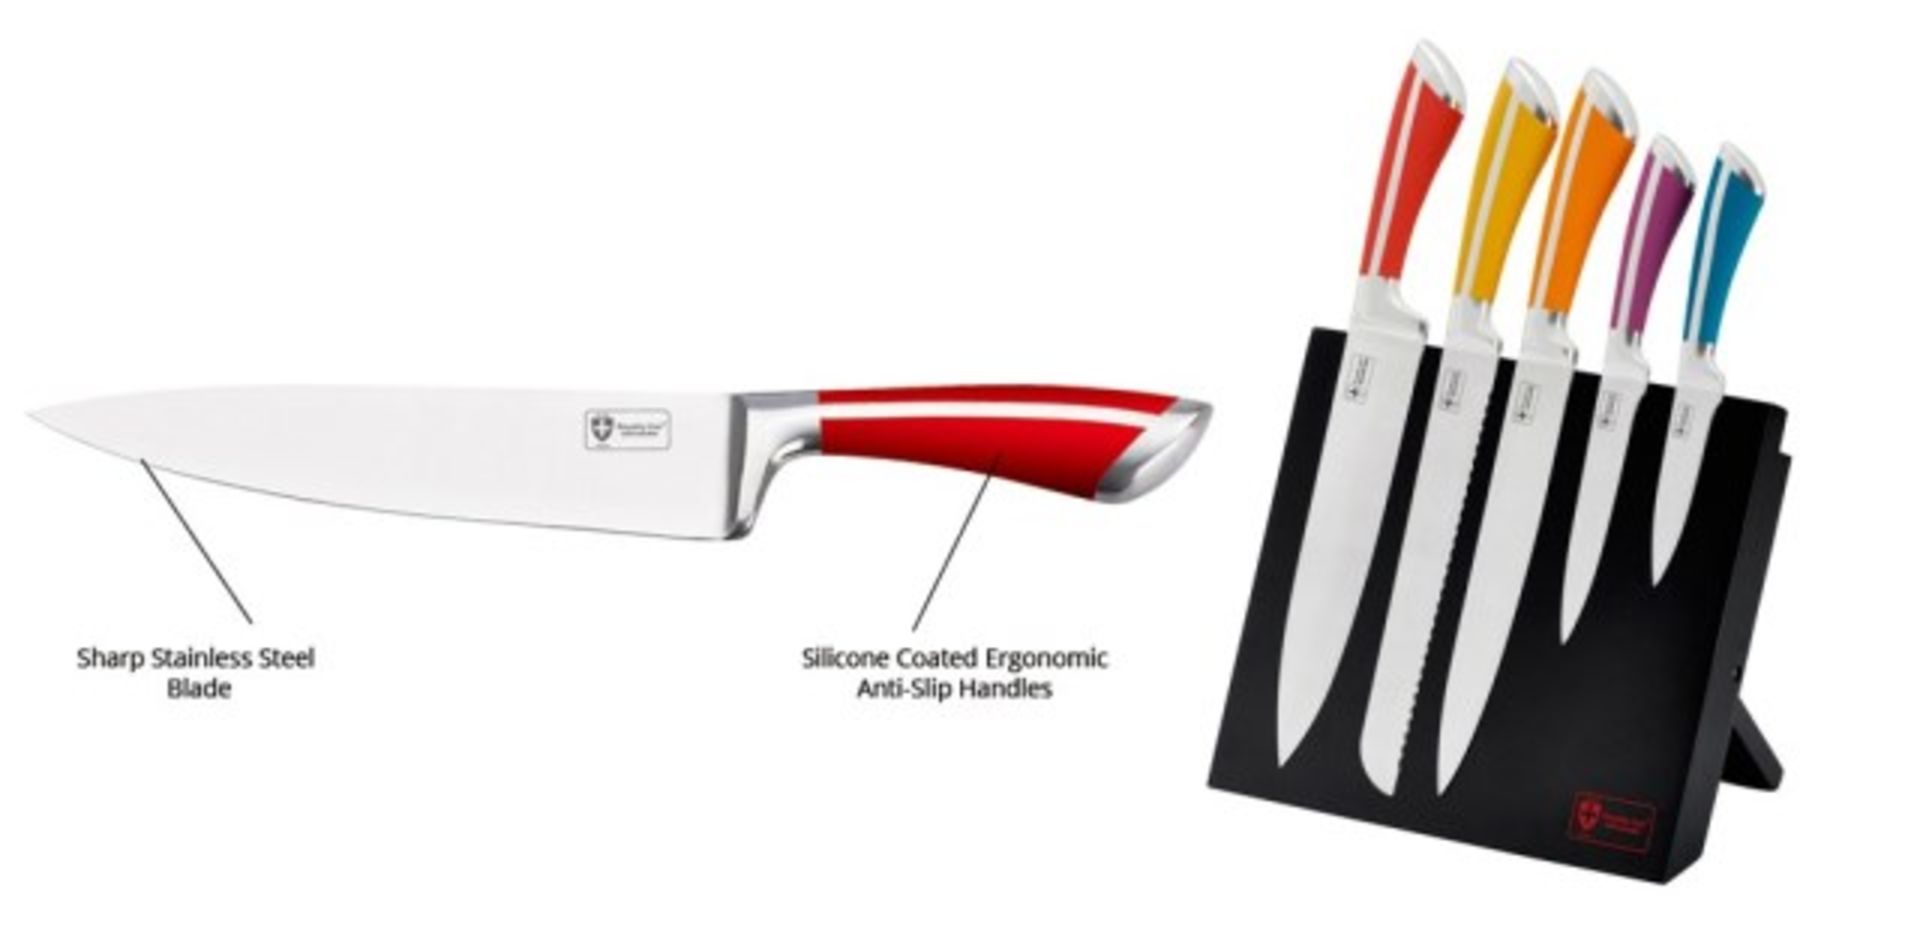 V Brand New 5 Piece Swiss Knife Set With Folding Magnetic Stand RRP199 Euros X 6 Bid price to be